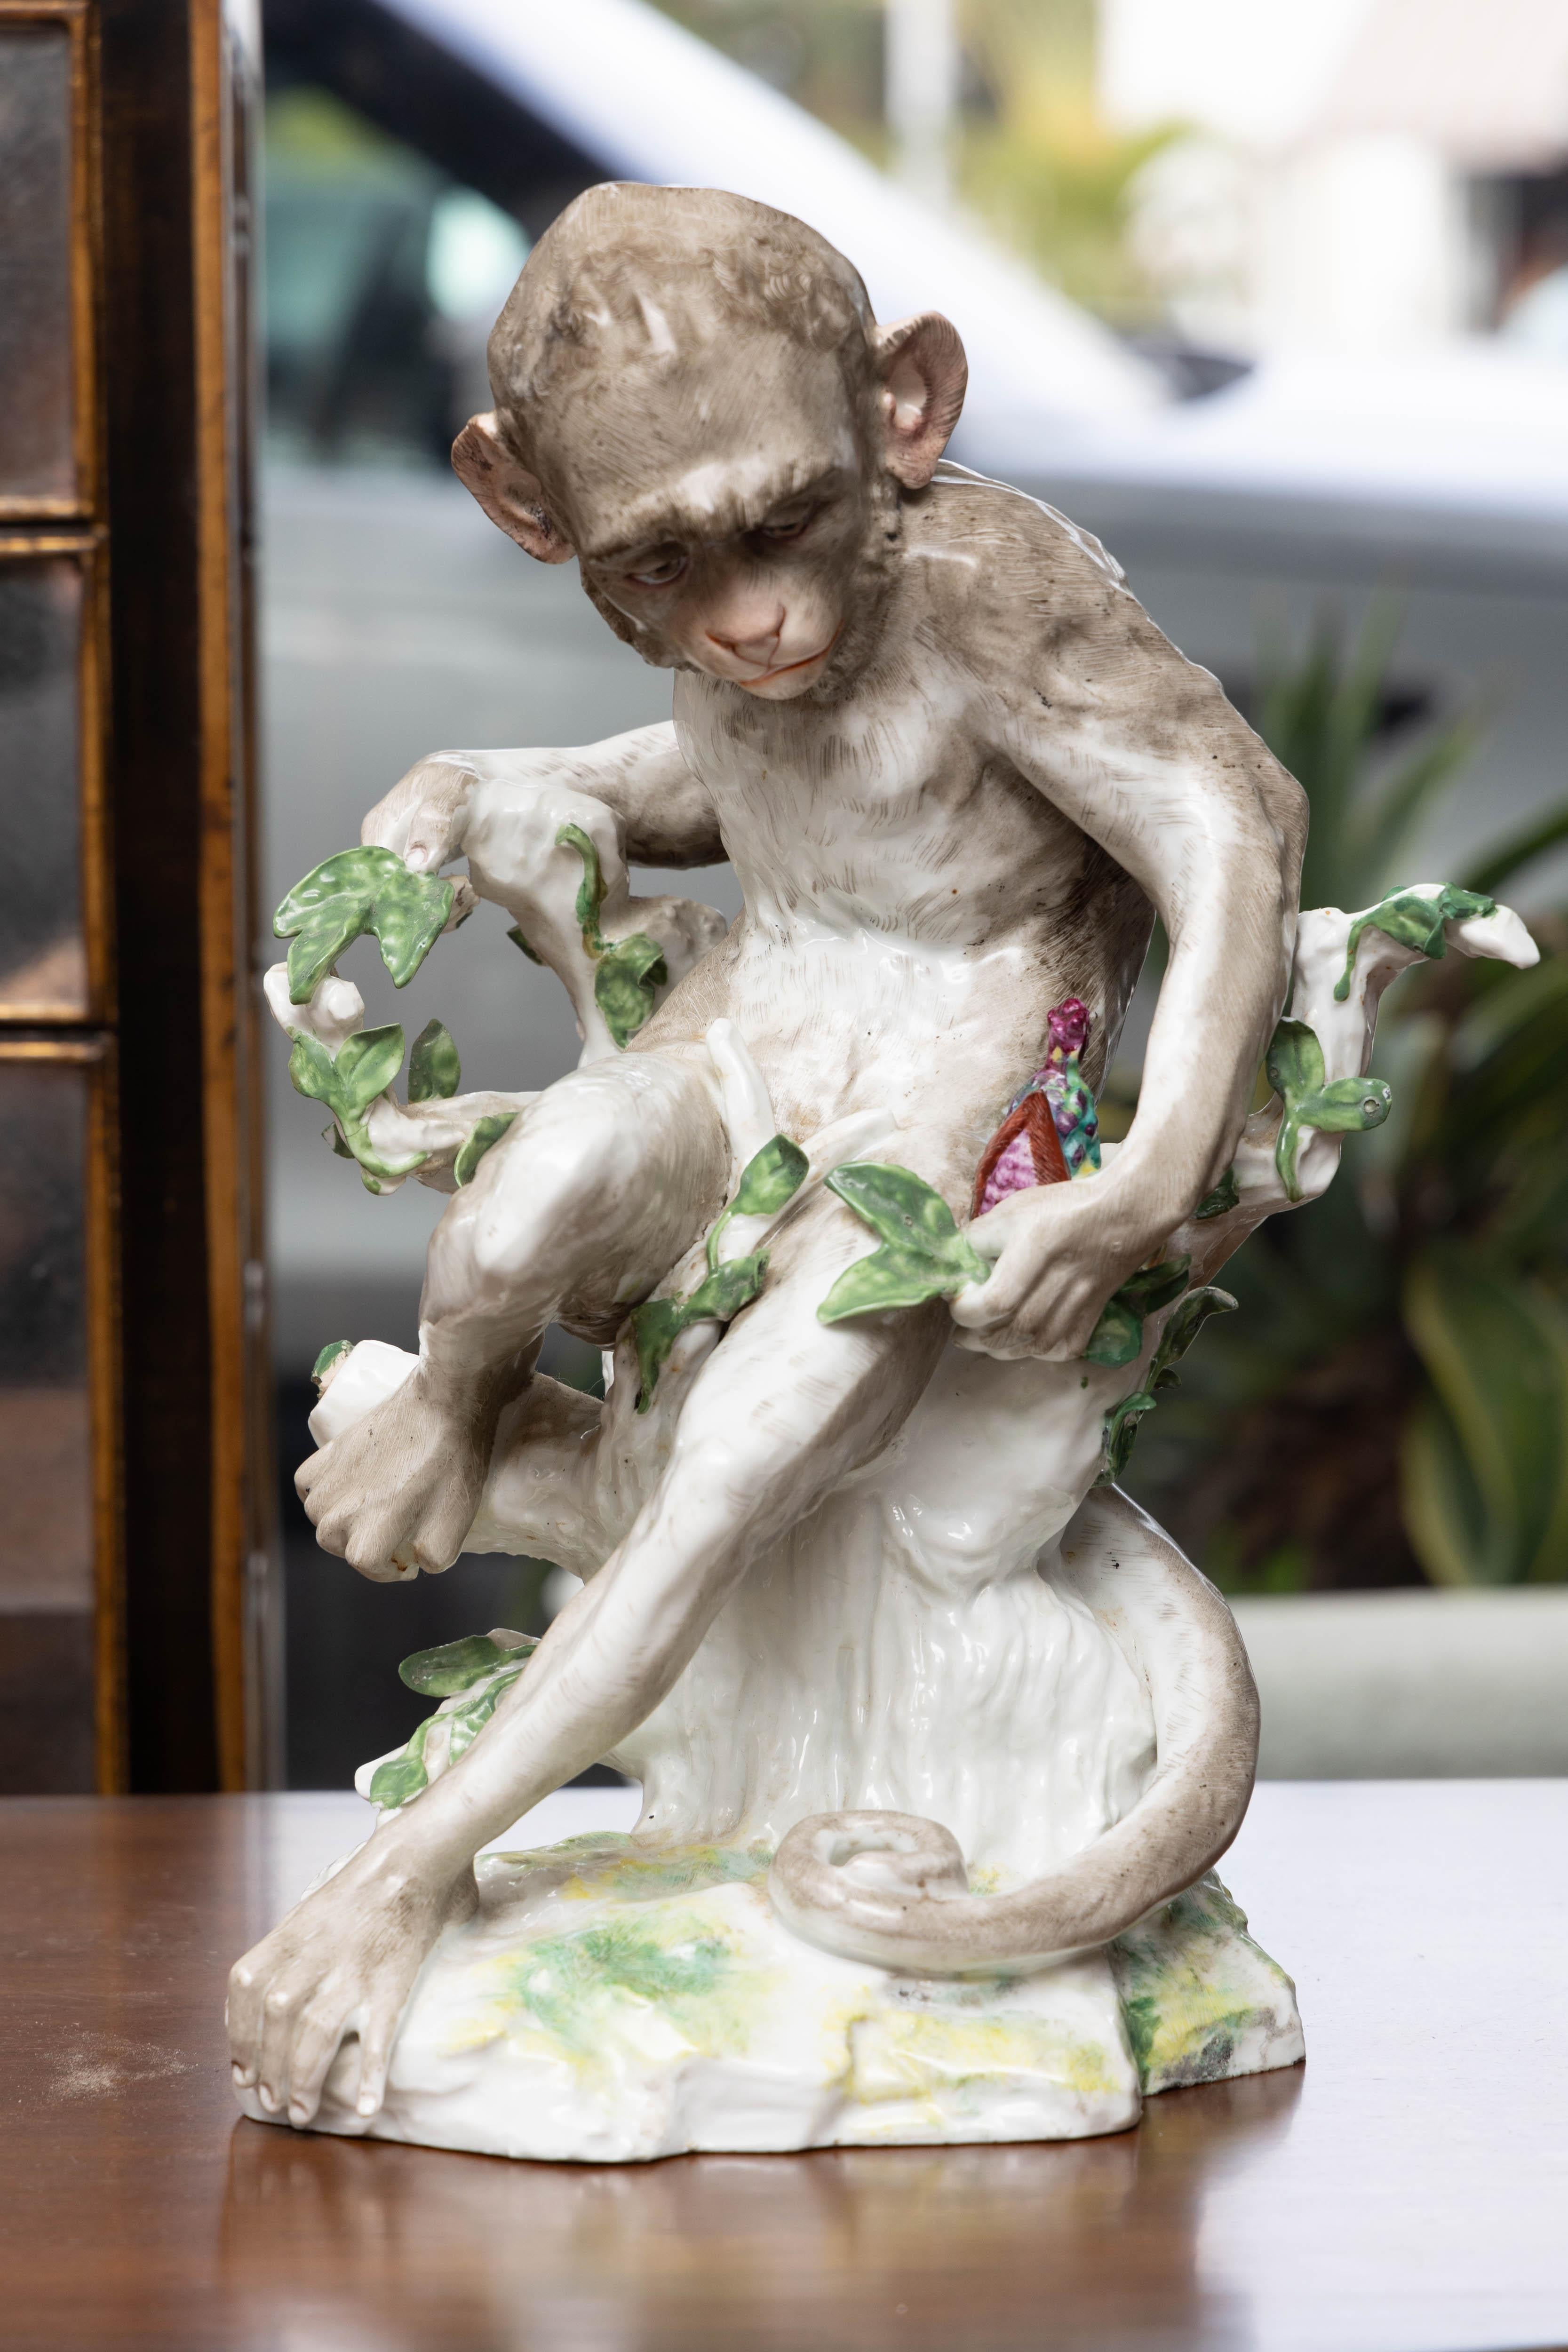 This is an exquisite Edmé Samson polychromed porcelain figure of a seated monkey in a naturalistic setting.  Underglaze mark. 19th century.